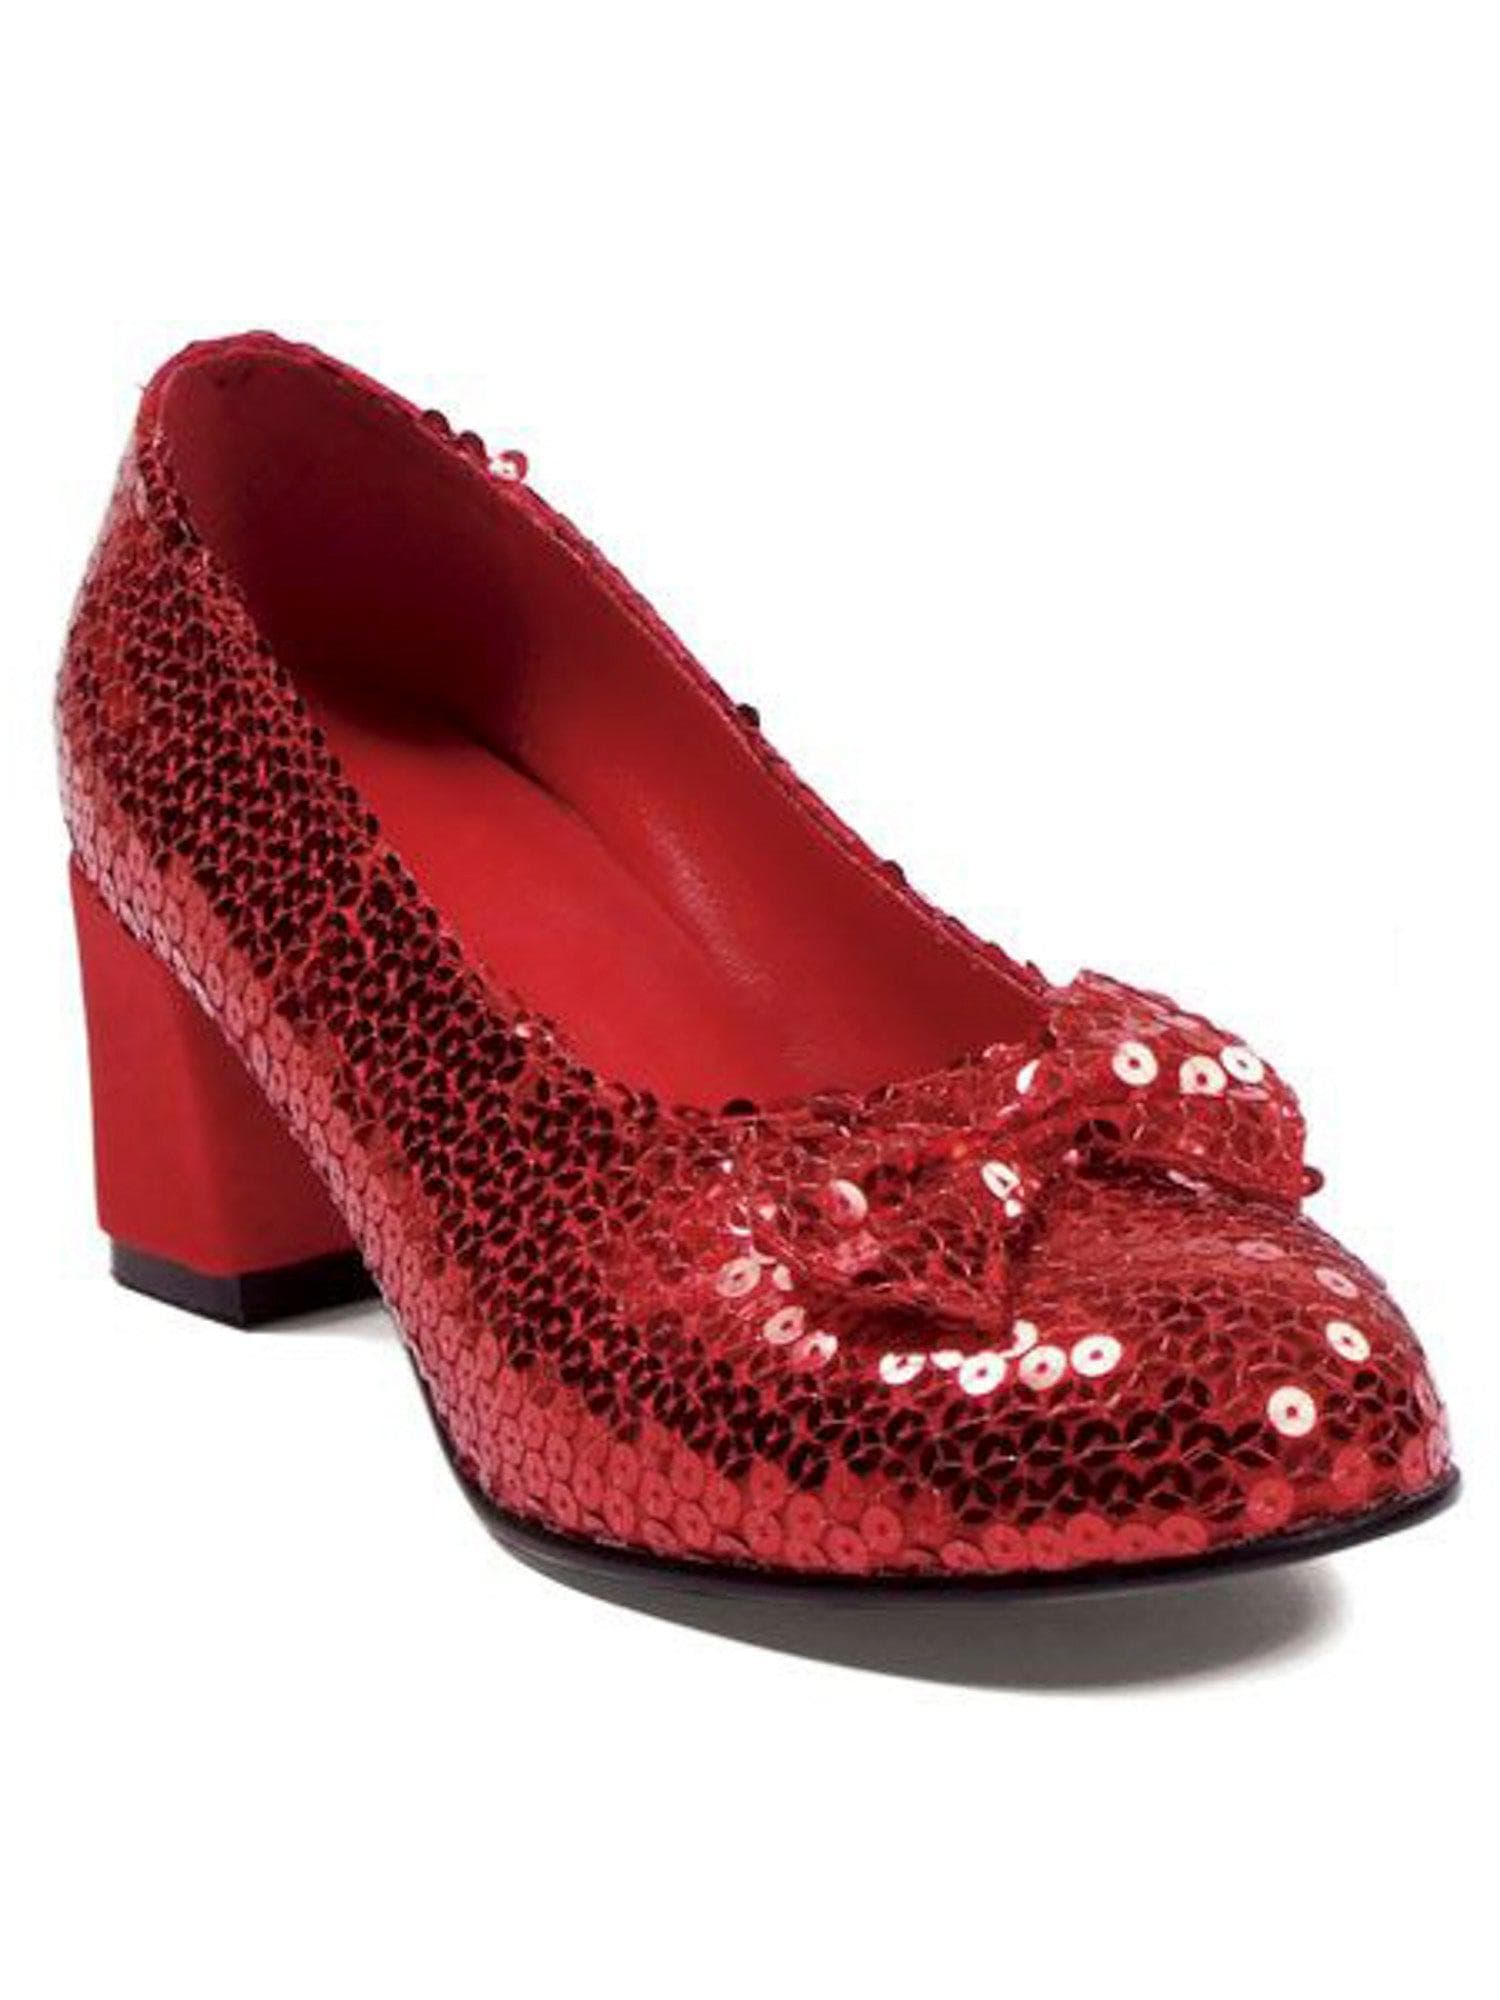 Adult Red Sequin Dorothy Shoes - costumes.com